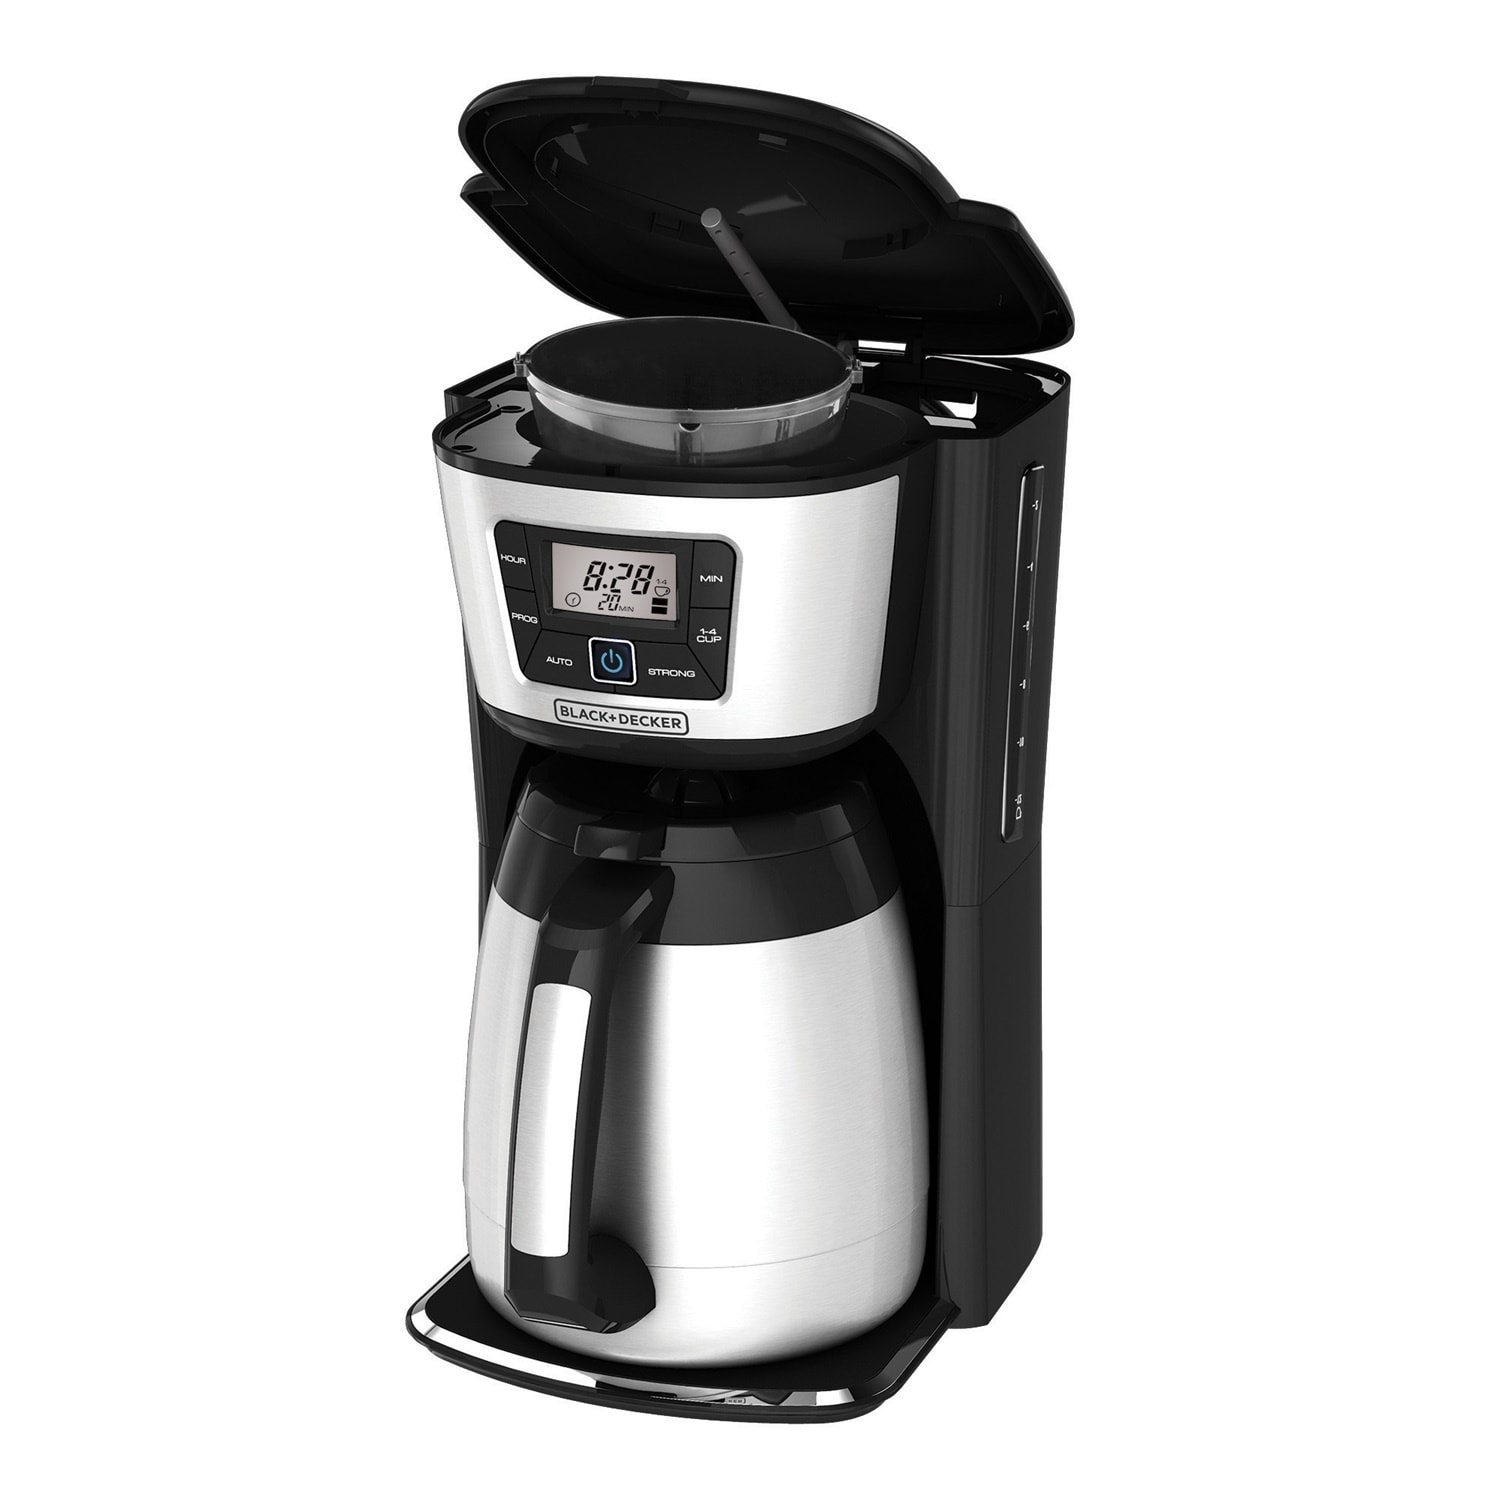 https://ak1.ostkcdn.com/images/products/is/images/direct/162abd10677a4b6a83a7106a3076ad4a4e9224e2/BLACK%2BDECKER-12-Cup-Thermal-Coffeemaker%2C-Black-Silver.jpg